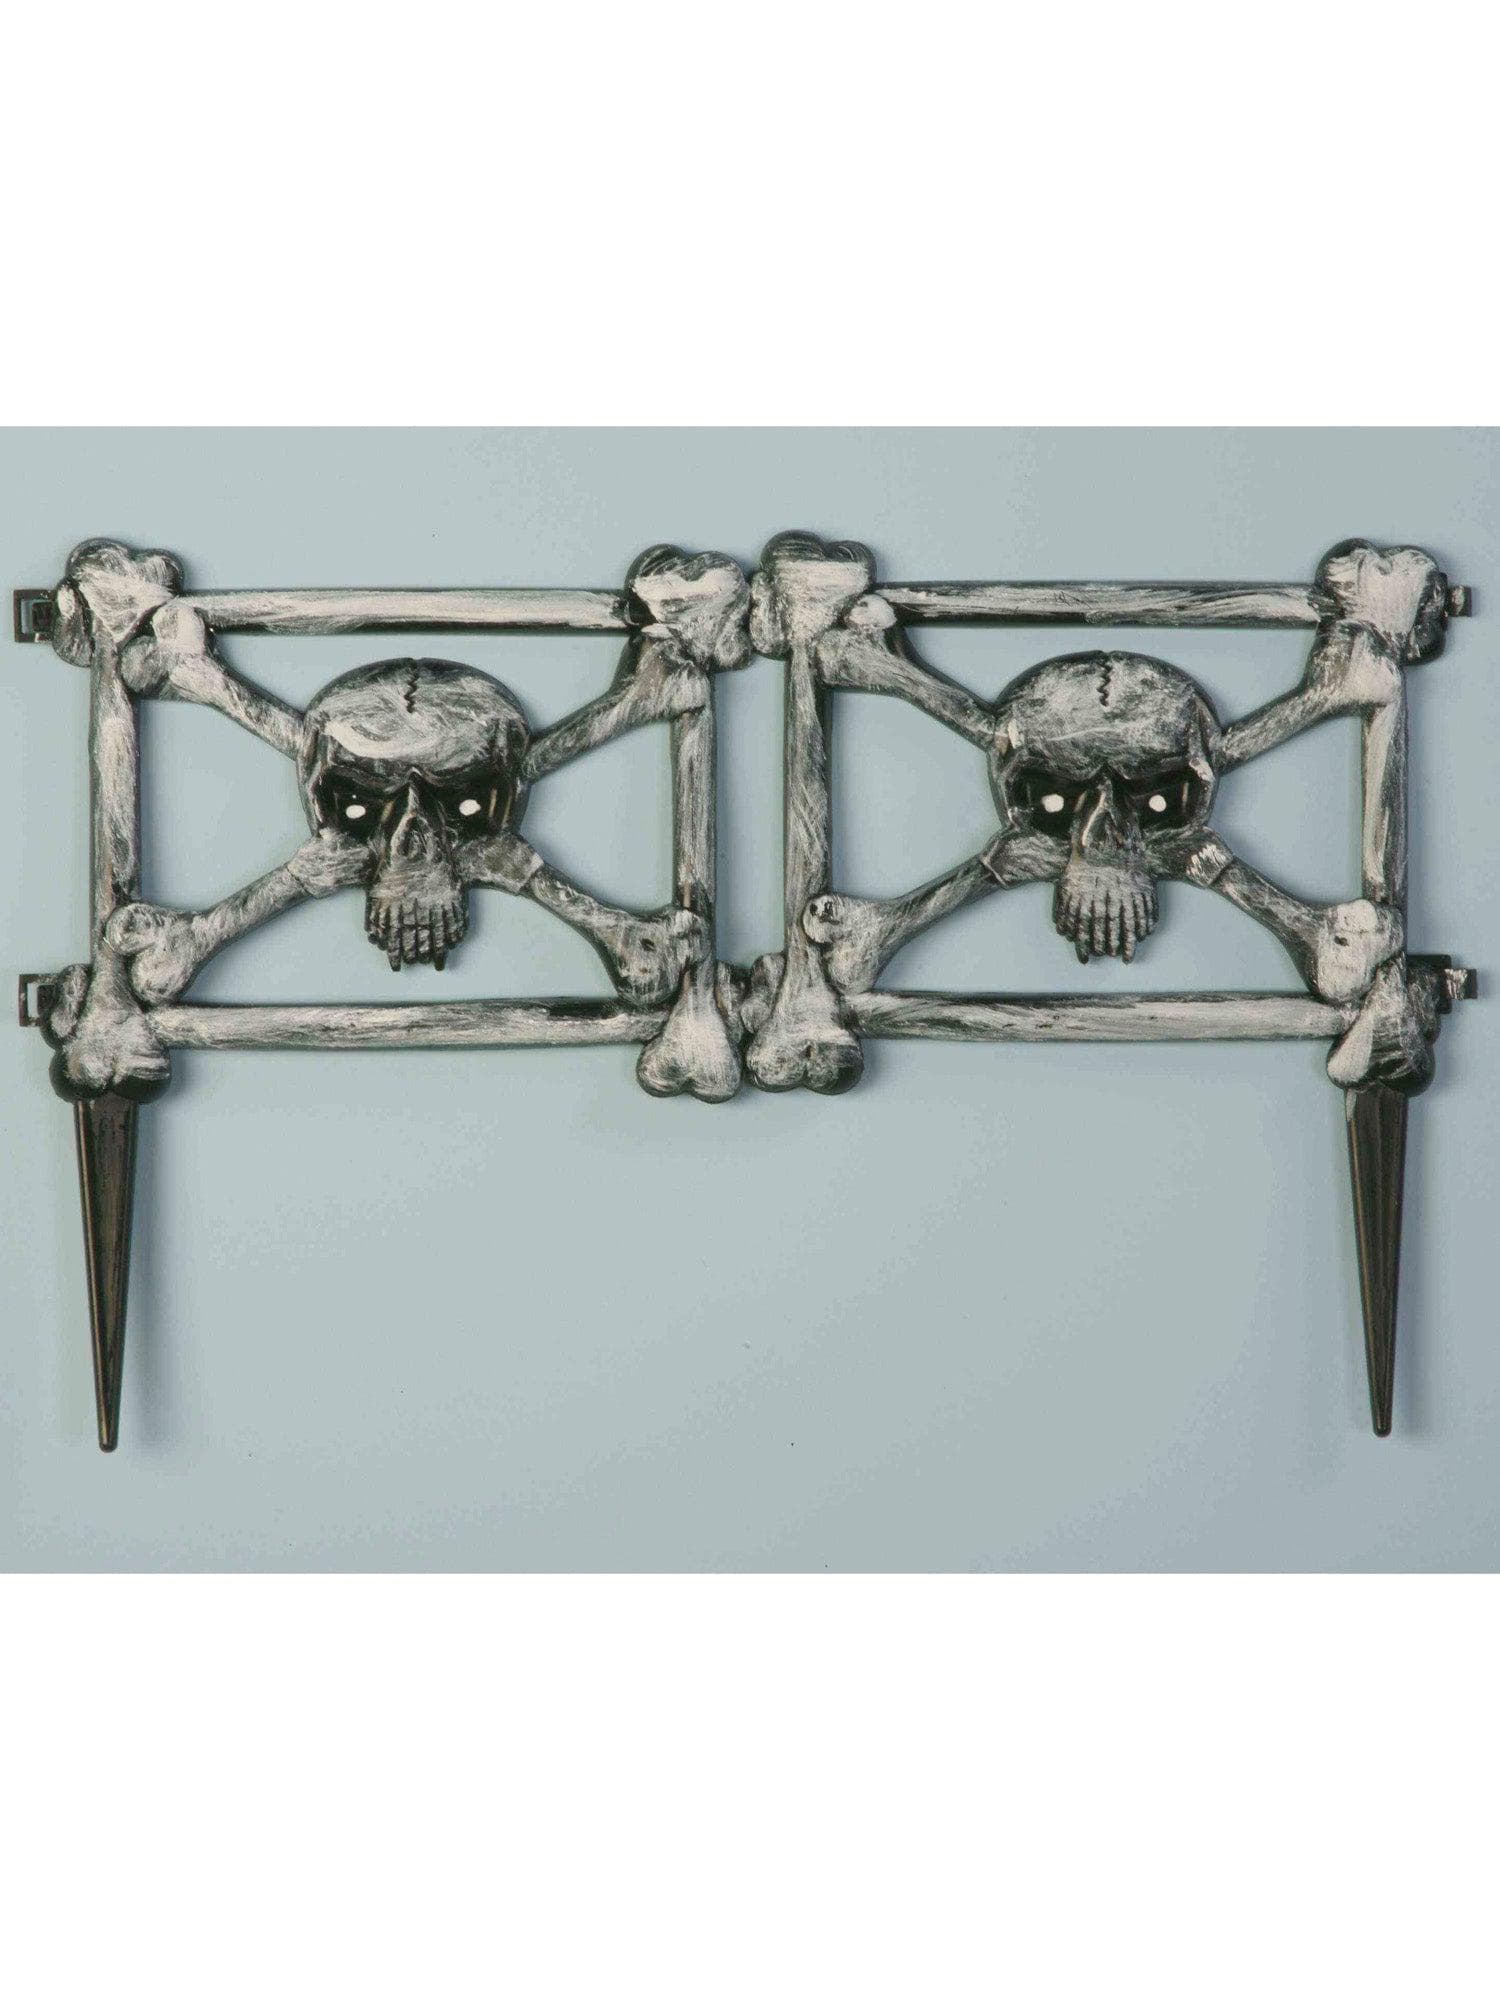 19-inch Skull Distressed Fence - costumes.com